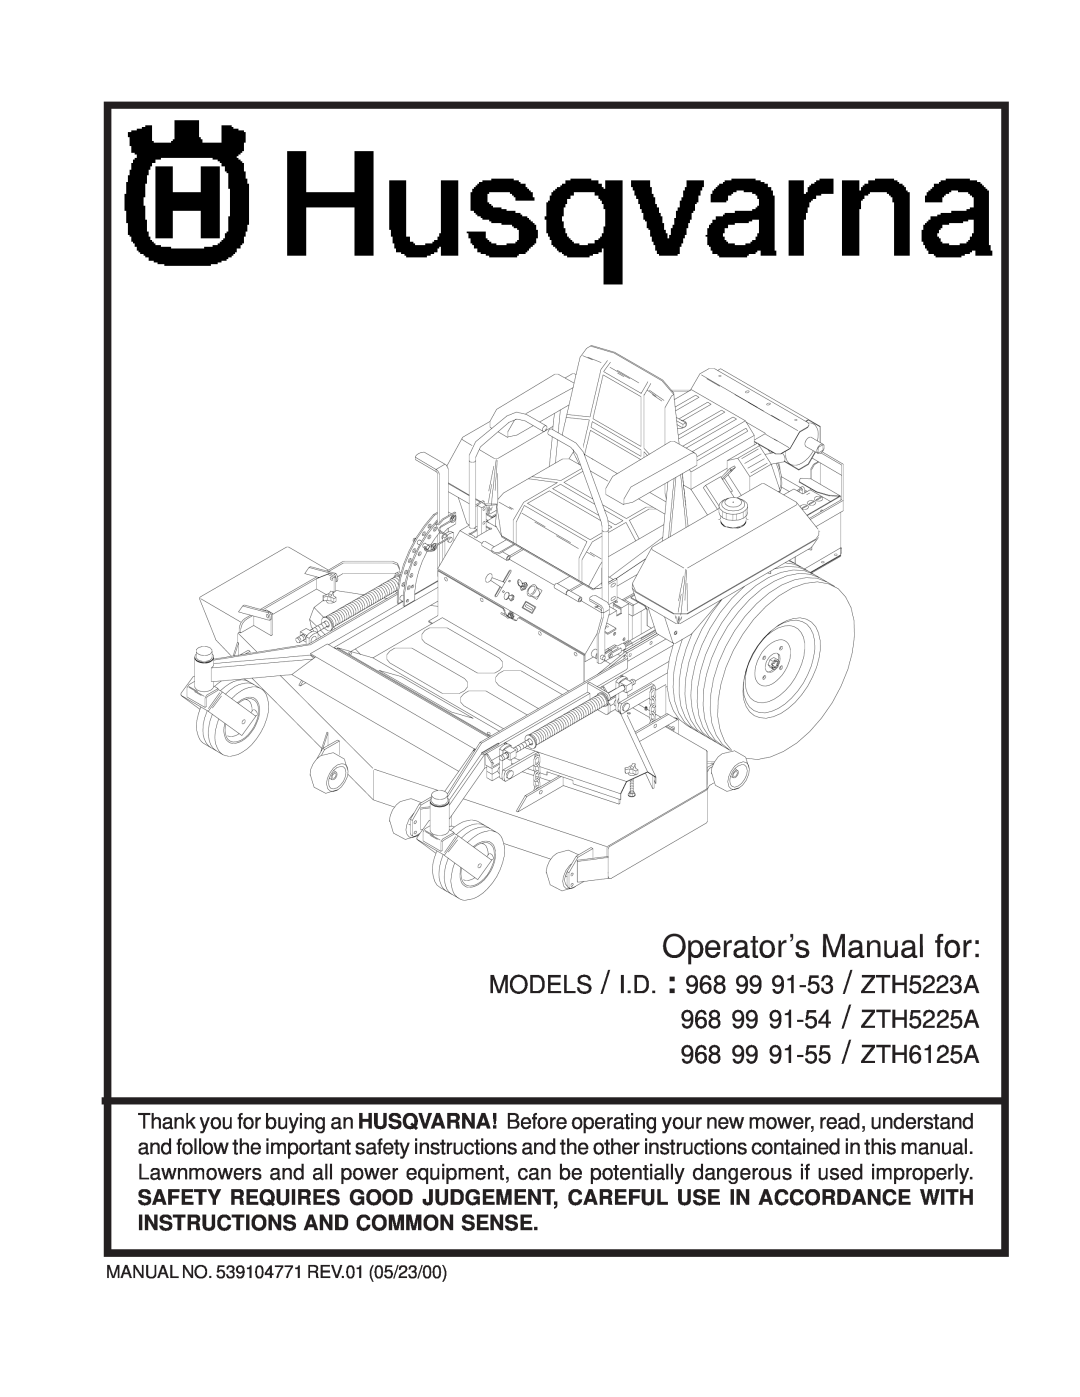 Husqvarna ZTH5223A, ZTH6125A important safety instructions Operator’s Manual for, MANUAL NO. 539104771 REV.01 05/23/00 